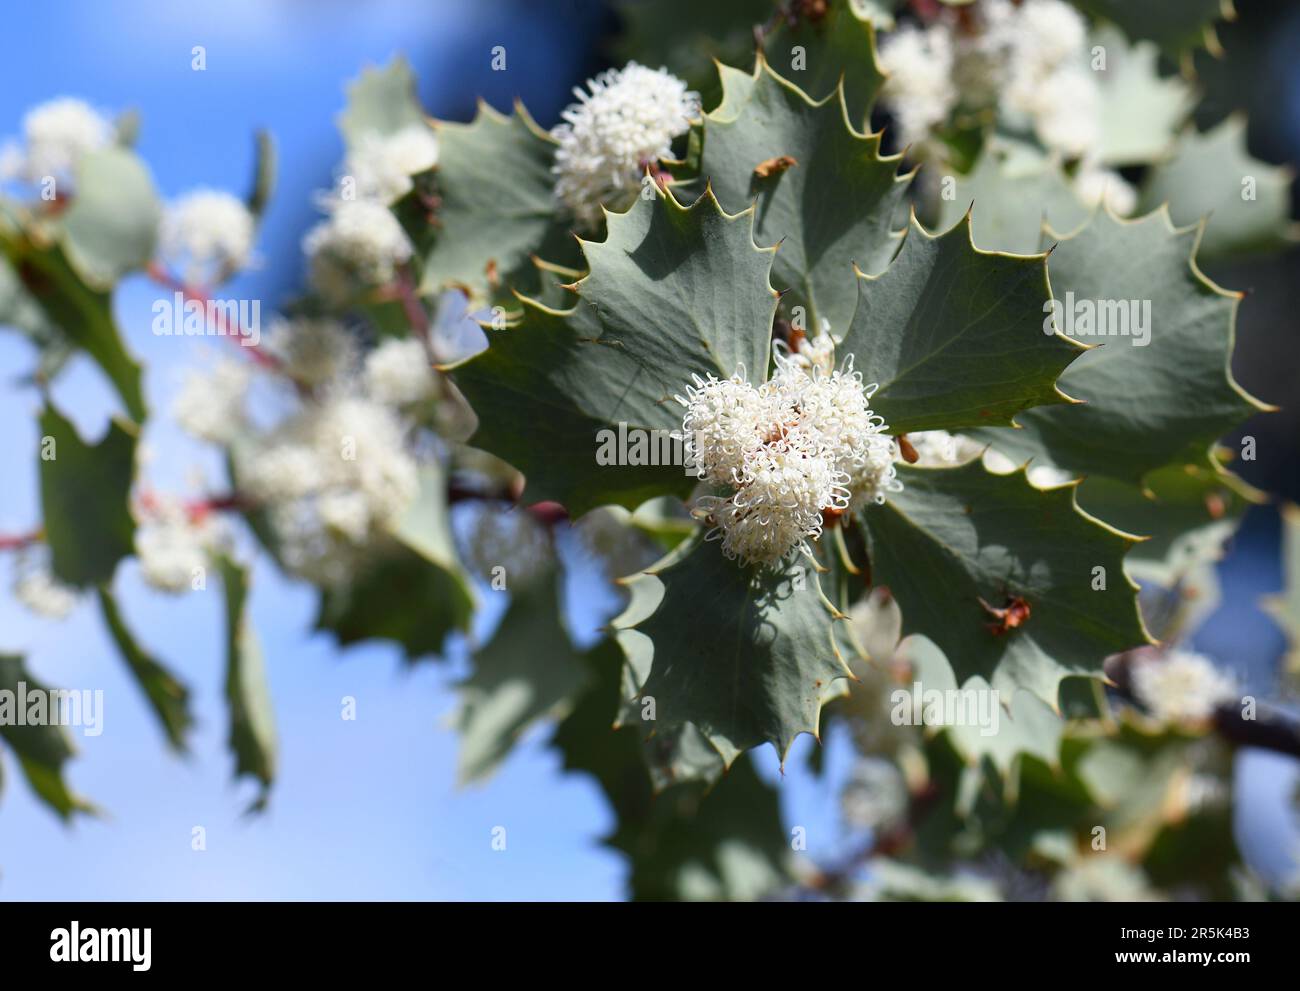 White flowers and holly-like leaves of the Australian native Hakea cristata, family Proteaceae. Endemic to Perth region of Western Australia Stock Photo